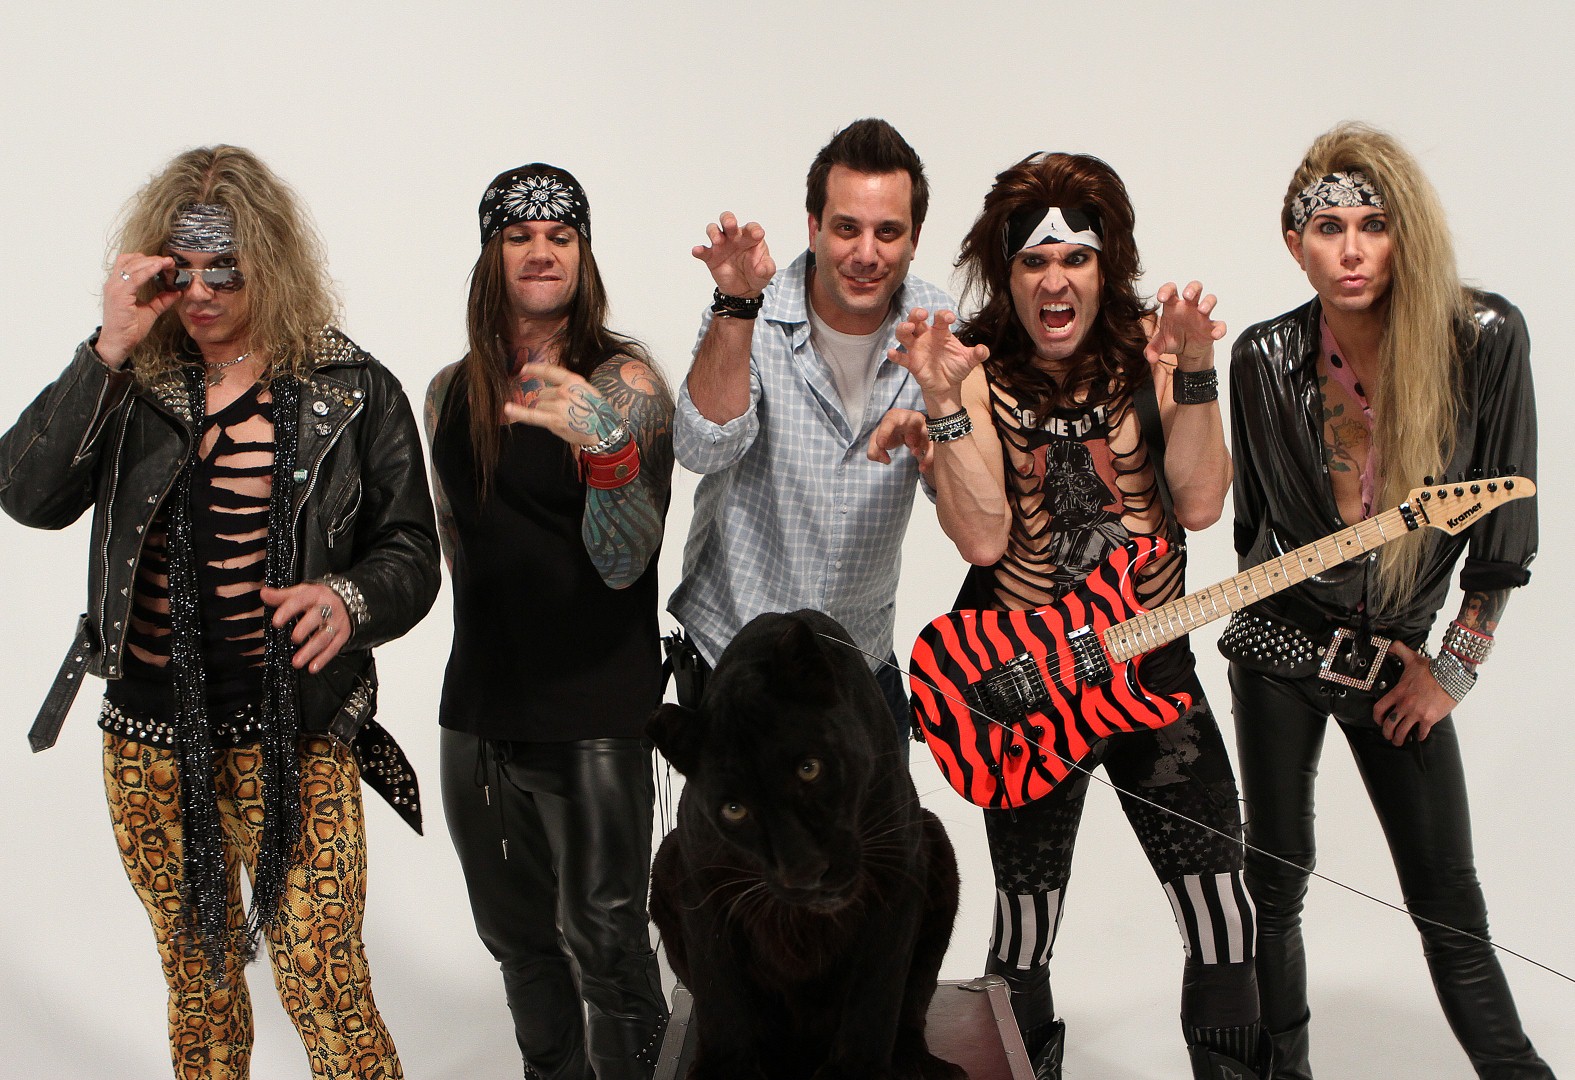 On Set with Steel Panther